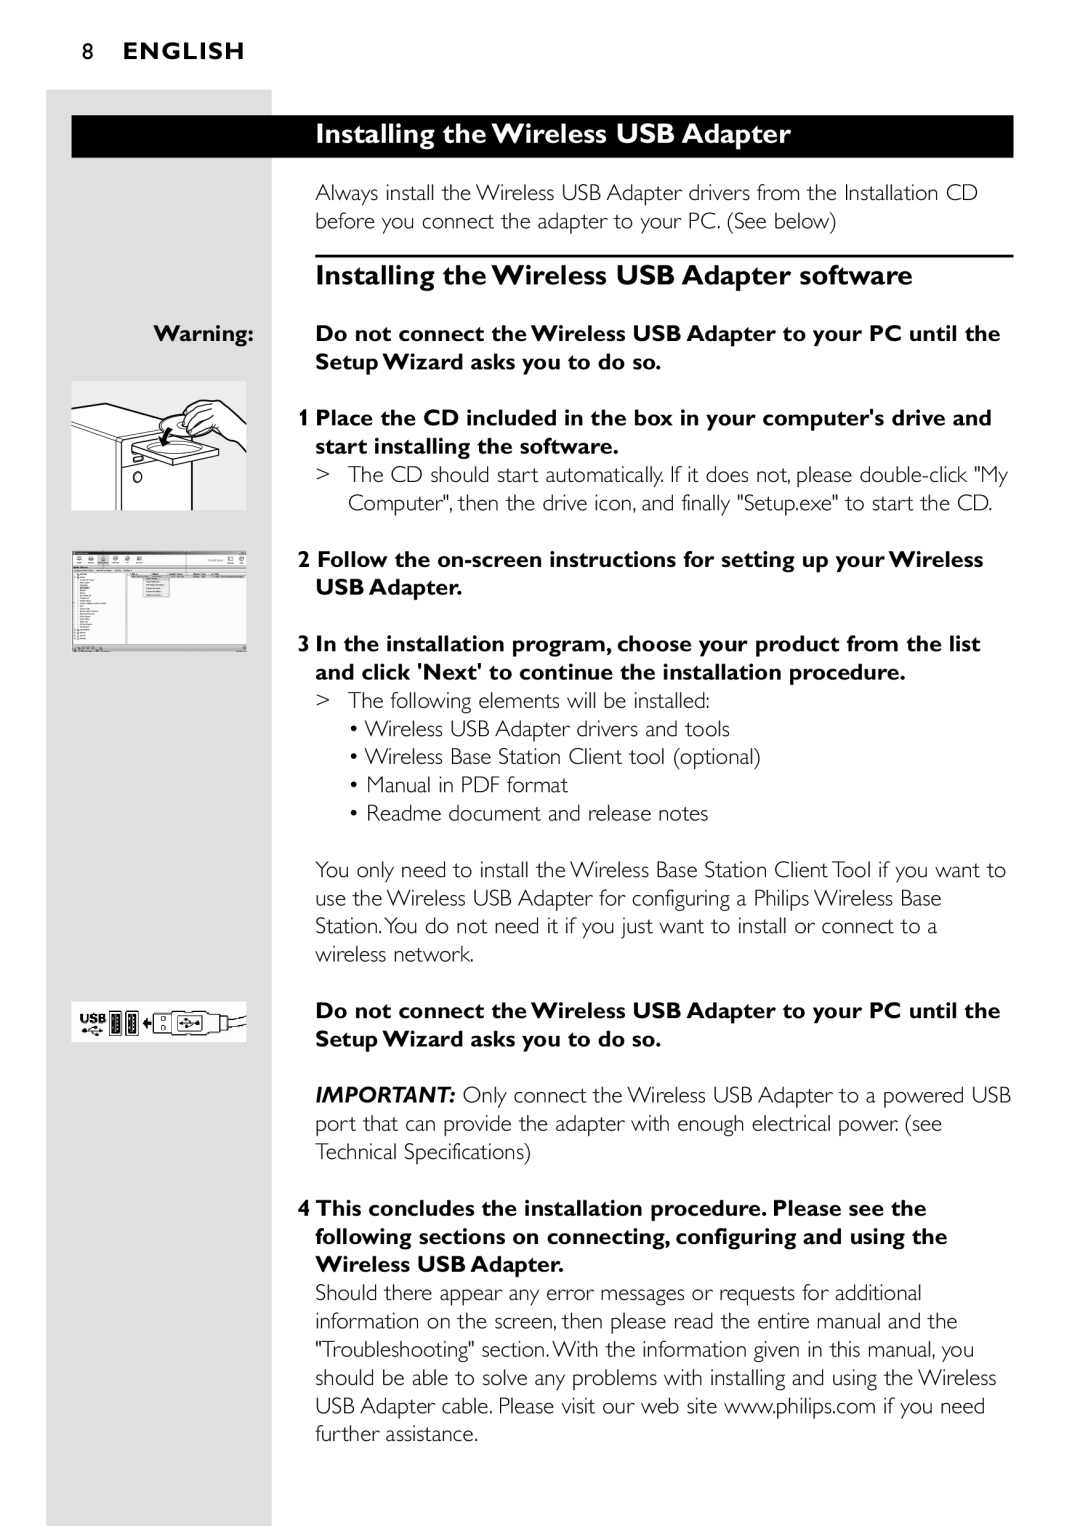 Philips CPWUA001 manual Installing the Wireless USB Adapter software, English 